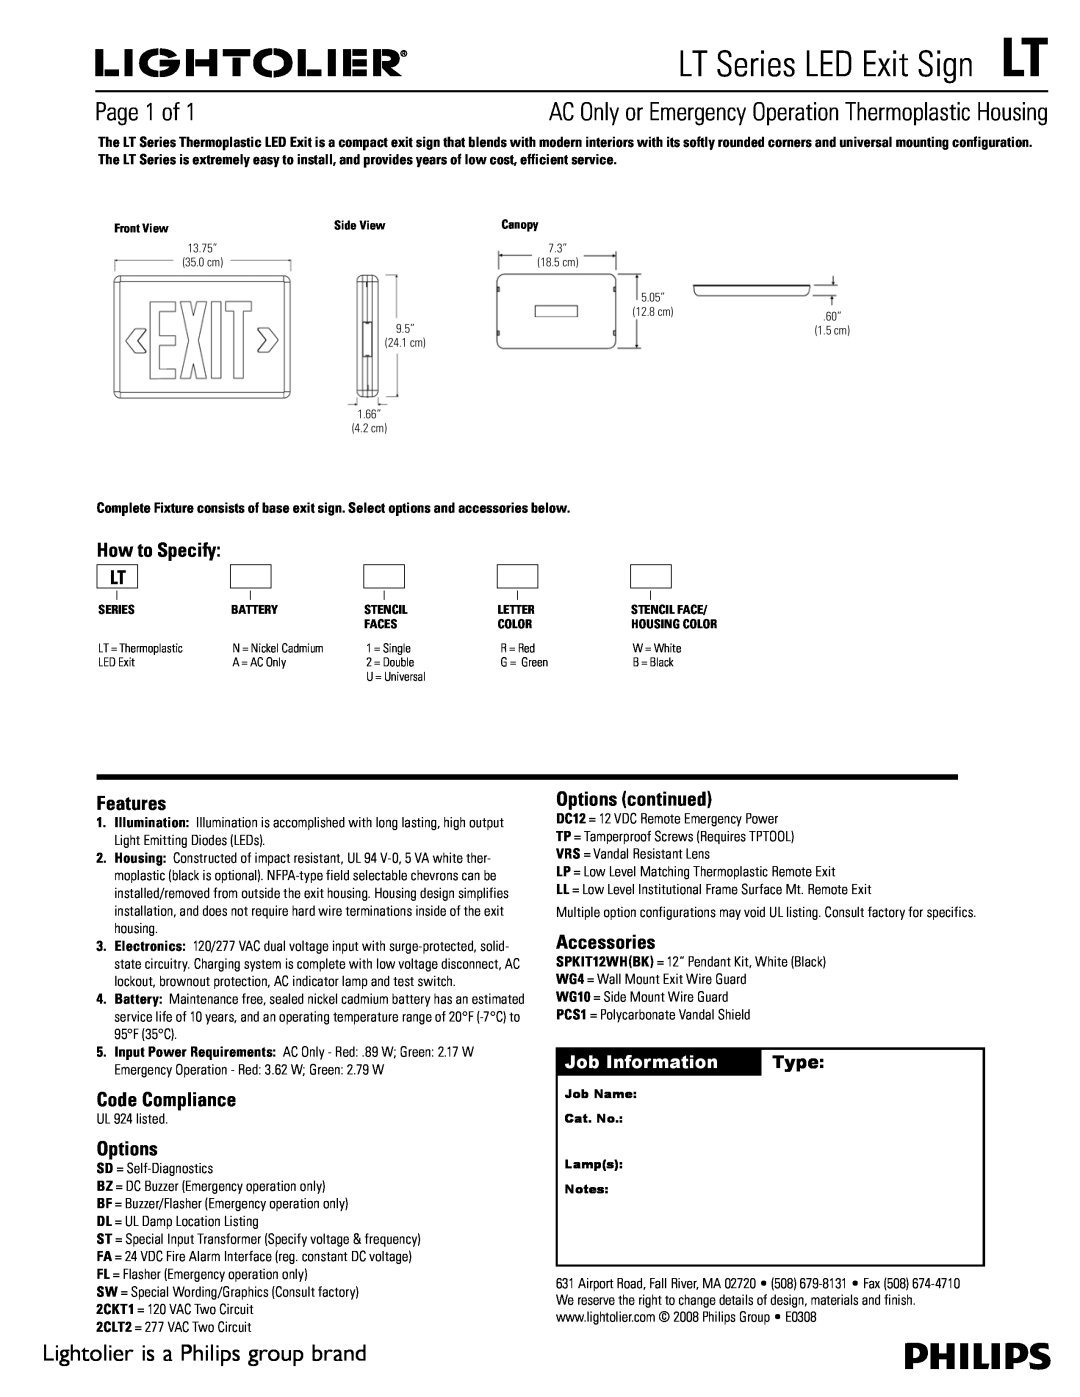 Lightolier LT Series manual LT Series LED Exit SignLT, Page 1 of, Lightolier is a Philips group brand, How to Specify LT 